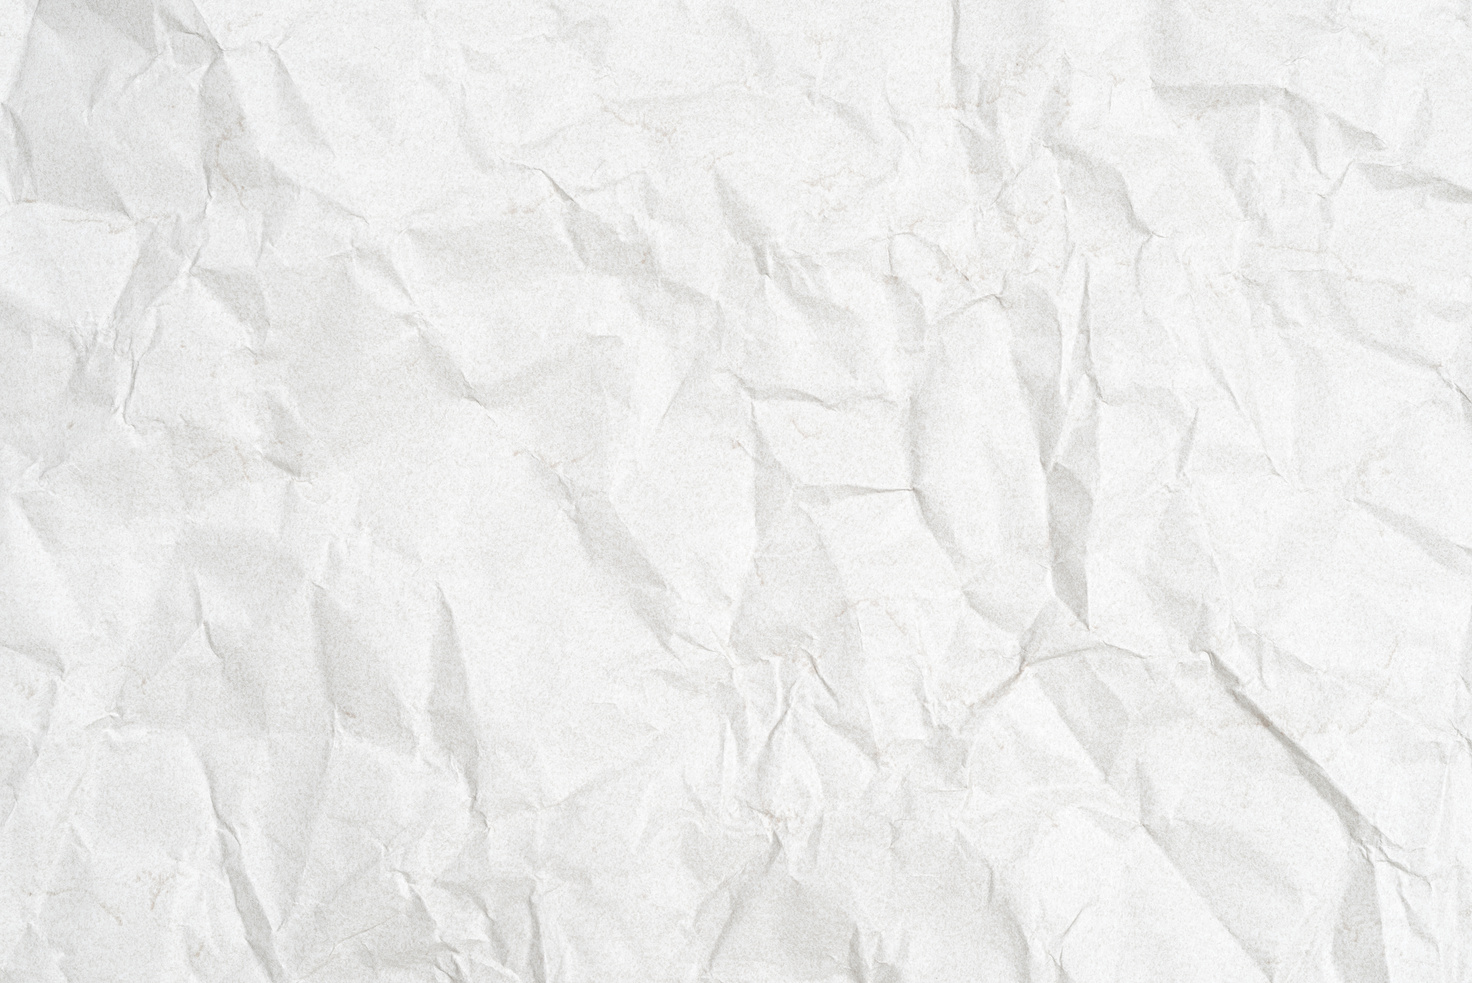 Crumpled sheet of white paper